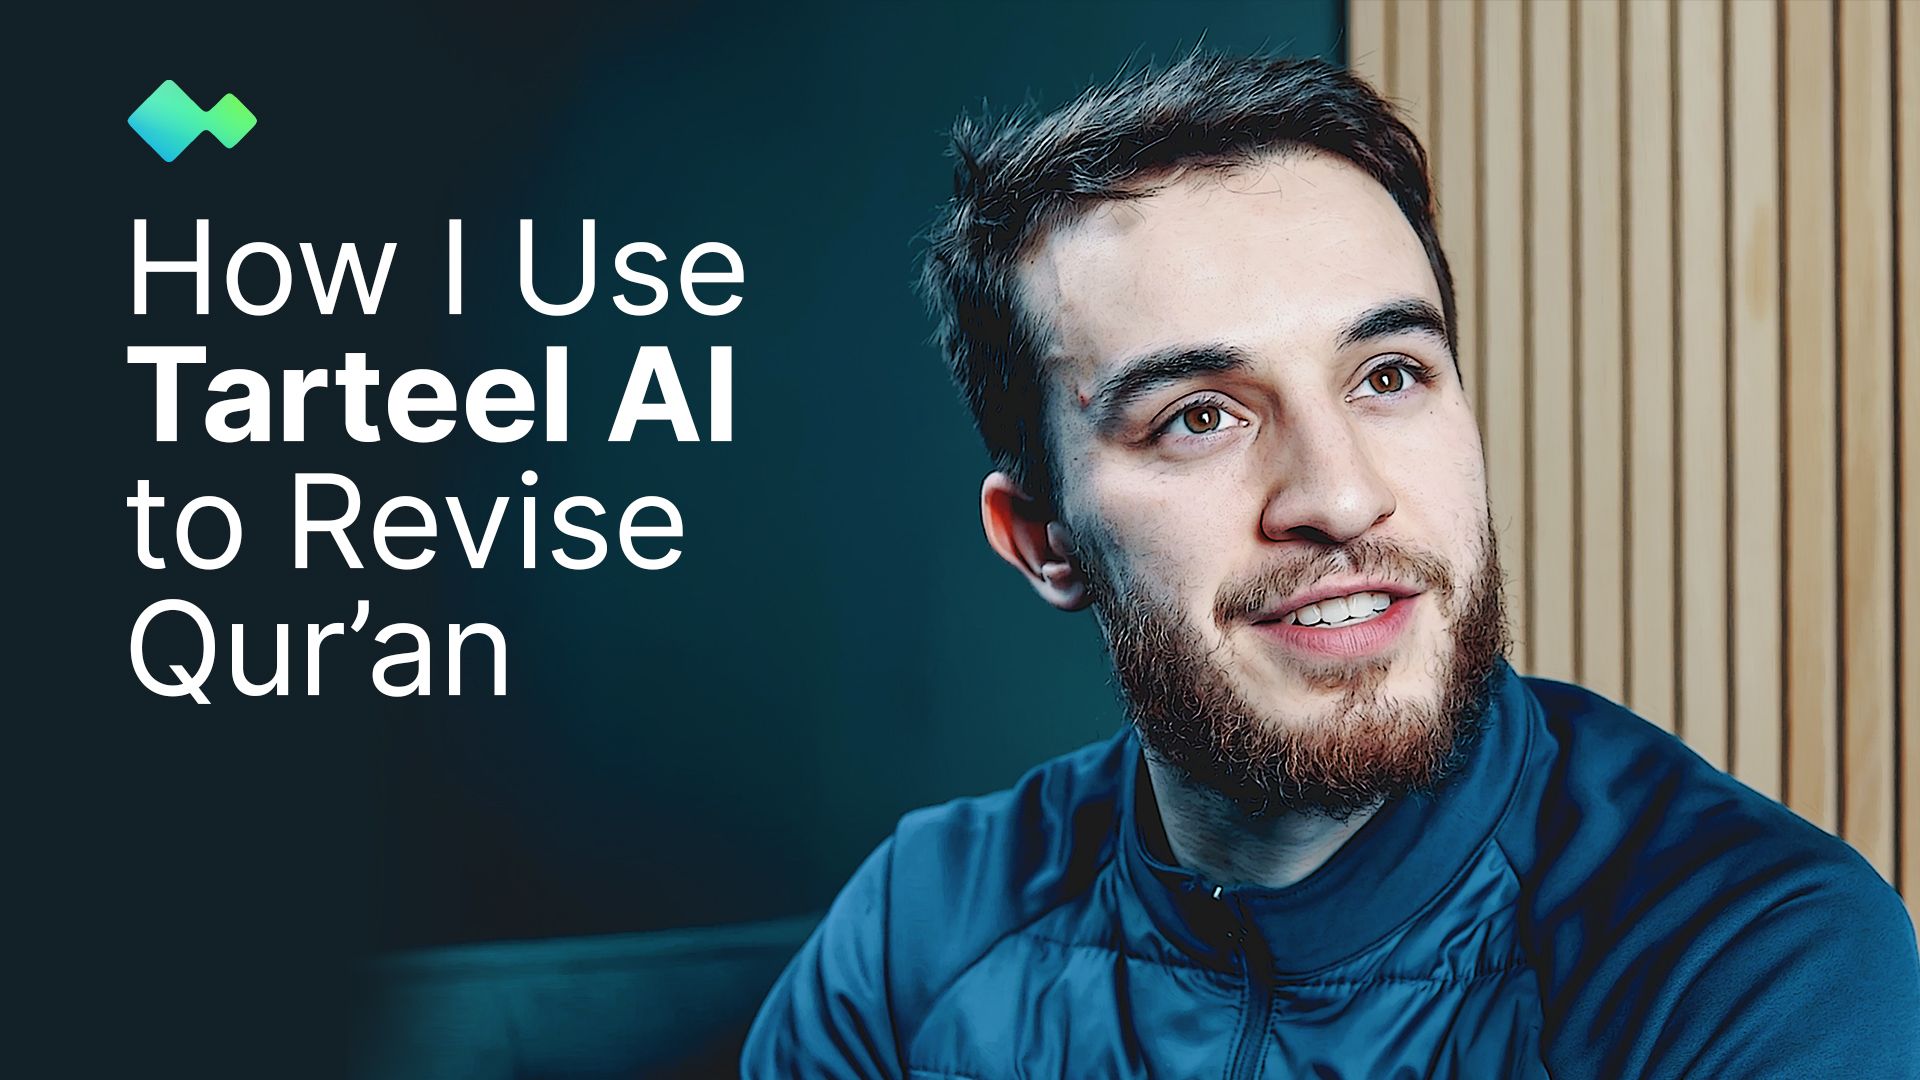 Case Study: How I Use Tarteel AI to Revise the Quran